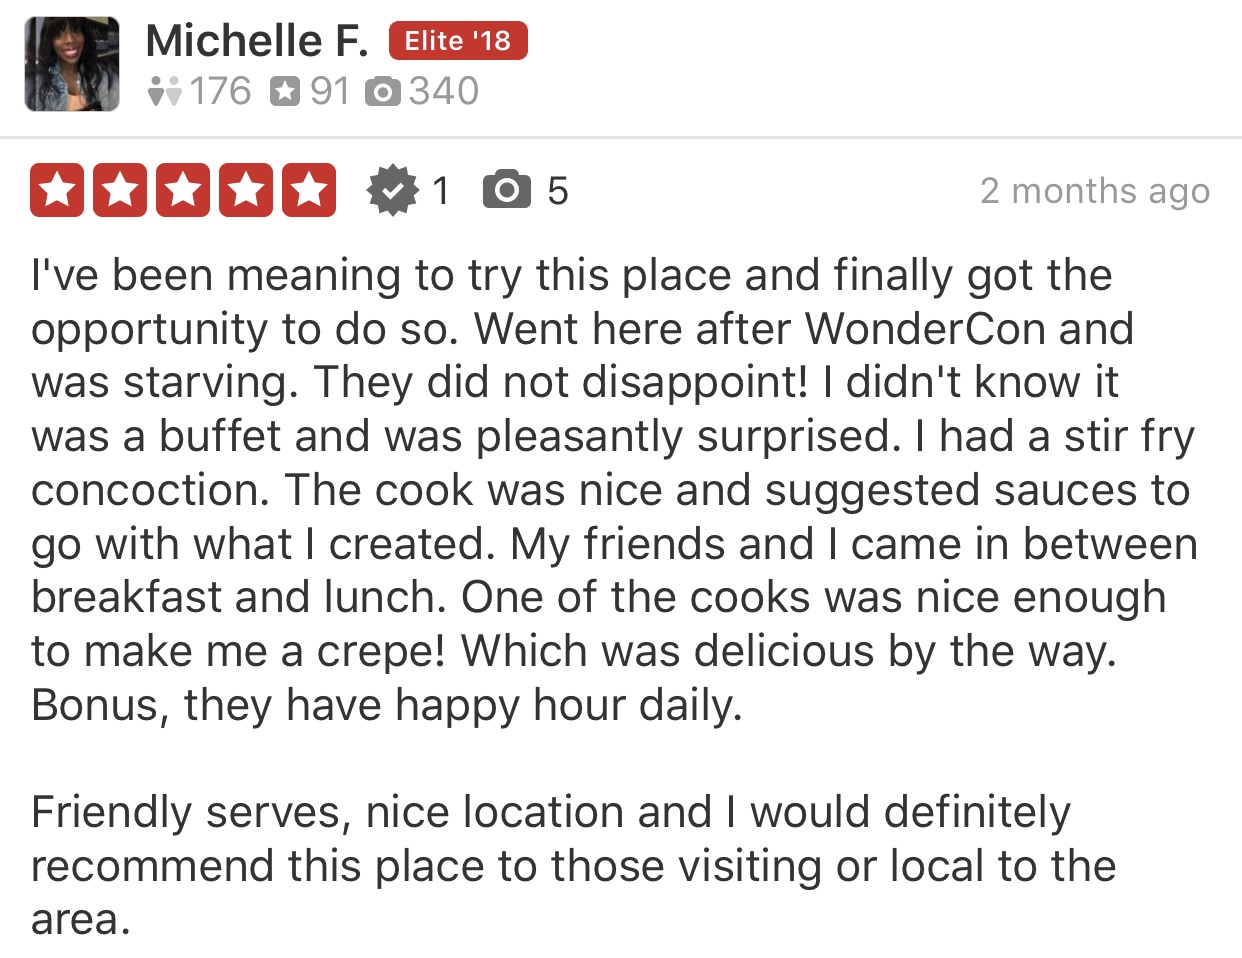 Image of a 5 star yelp review - I've been meaning to try this place and finally got the opportunity to do so. Went here after WonderCon and was starving. They did not disappoint! I didn't know it was a buffet and was pleasantly surprised. I had a stir fry concoction. The cook was nice and suggested sauces to go with what I created. My friends and I came in between breakfast and lunch. One of the cooks was nice enough to make me a crepe! Which was delicious by the way. Bonus, they have happy hour daily. Friendly servers, nice location and I would definitely recommend this place to those visiting or local to the area.